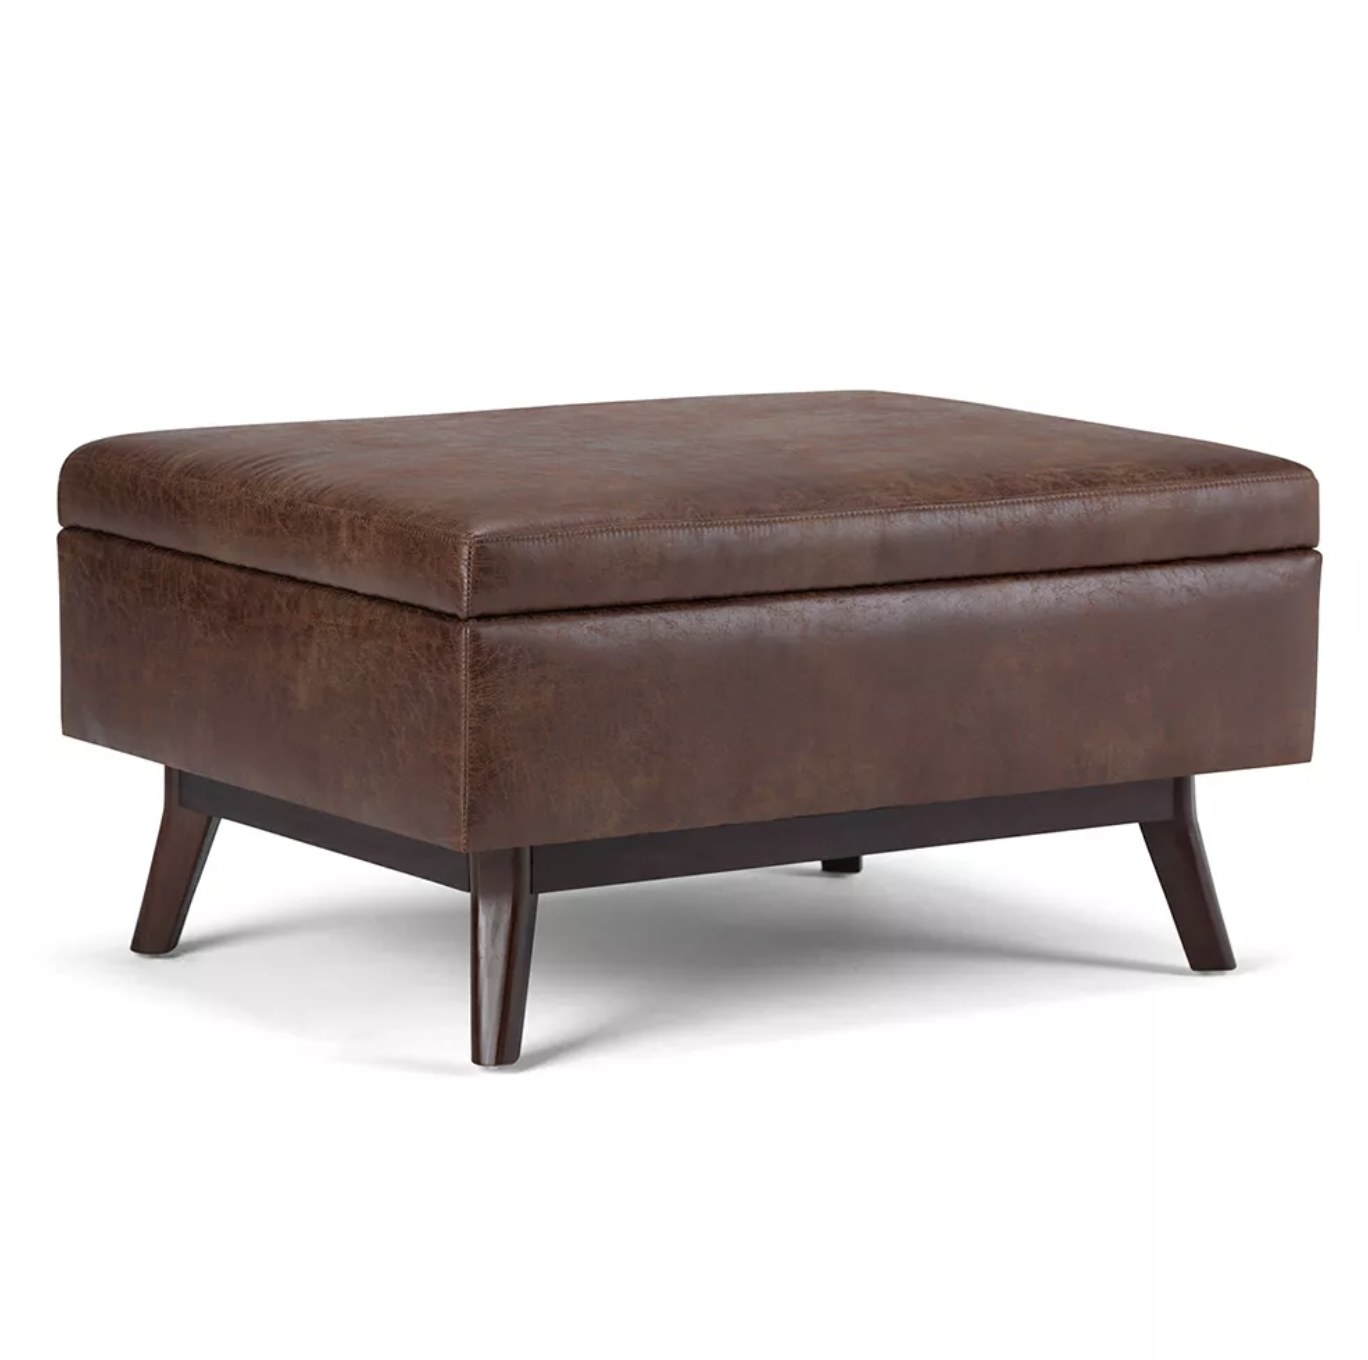 A brown leather coffee table storage ottoman with dark wooden legs